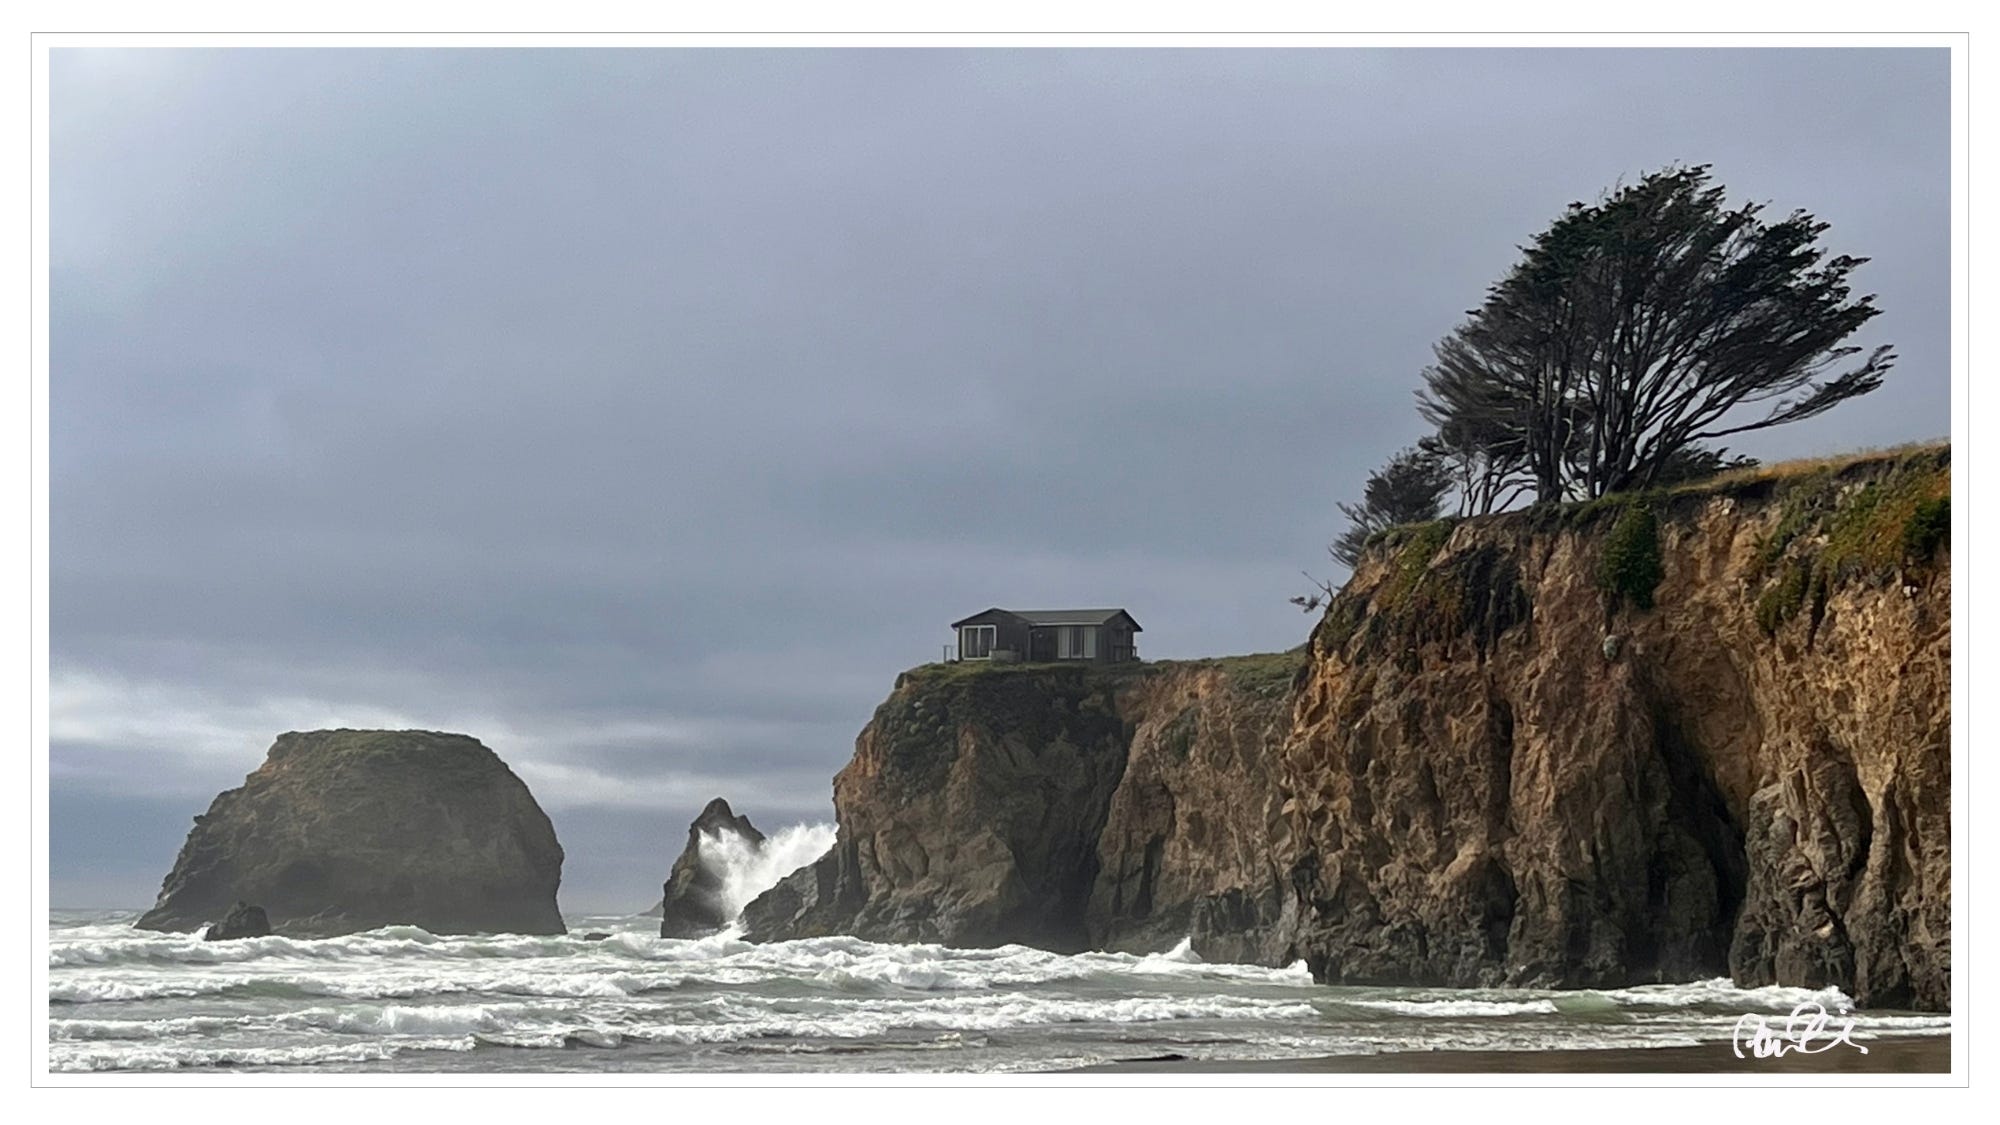 Pacific ocean, cliffside house, windswept trees